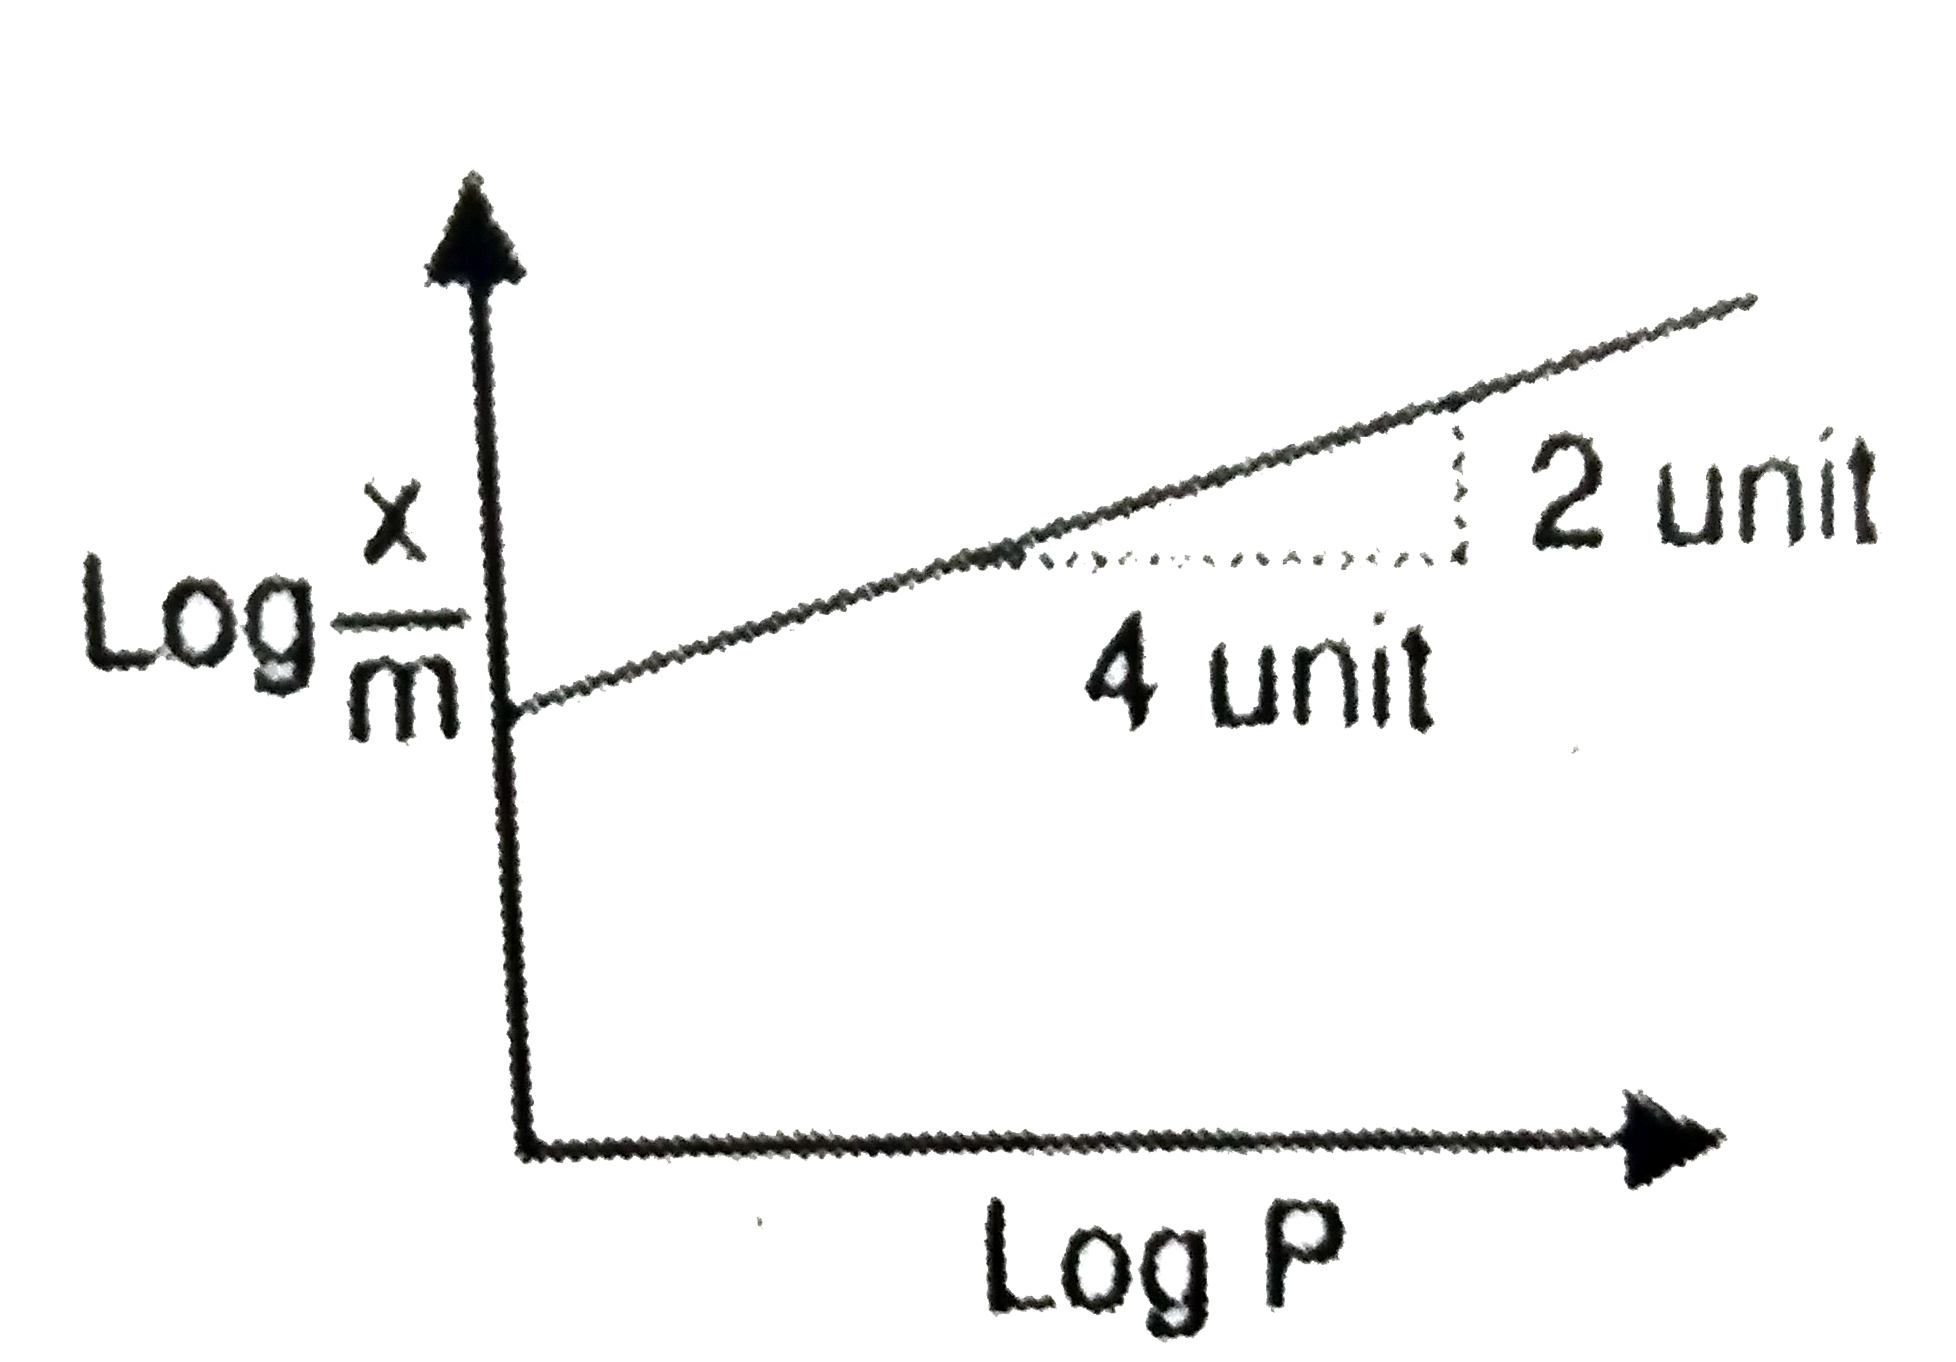 Adsorption of a gas follows Freundlich adsorption isotherm. In the given plot, x is the mass of the gas adsorbed on mass m of the adsorbent at pressure p. (x)/(m) is proportional to :